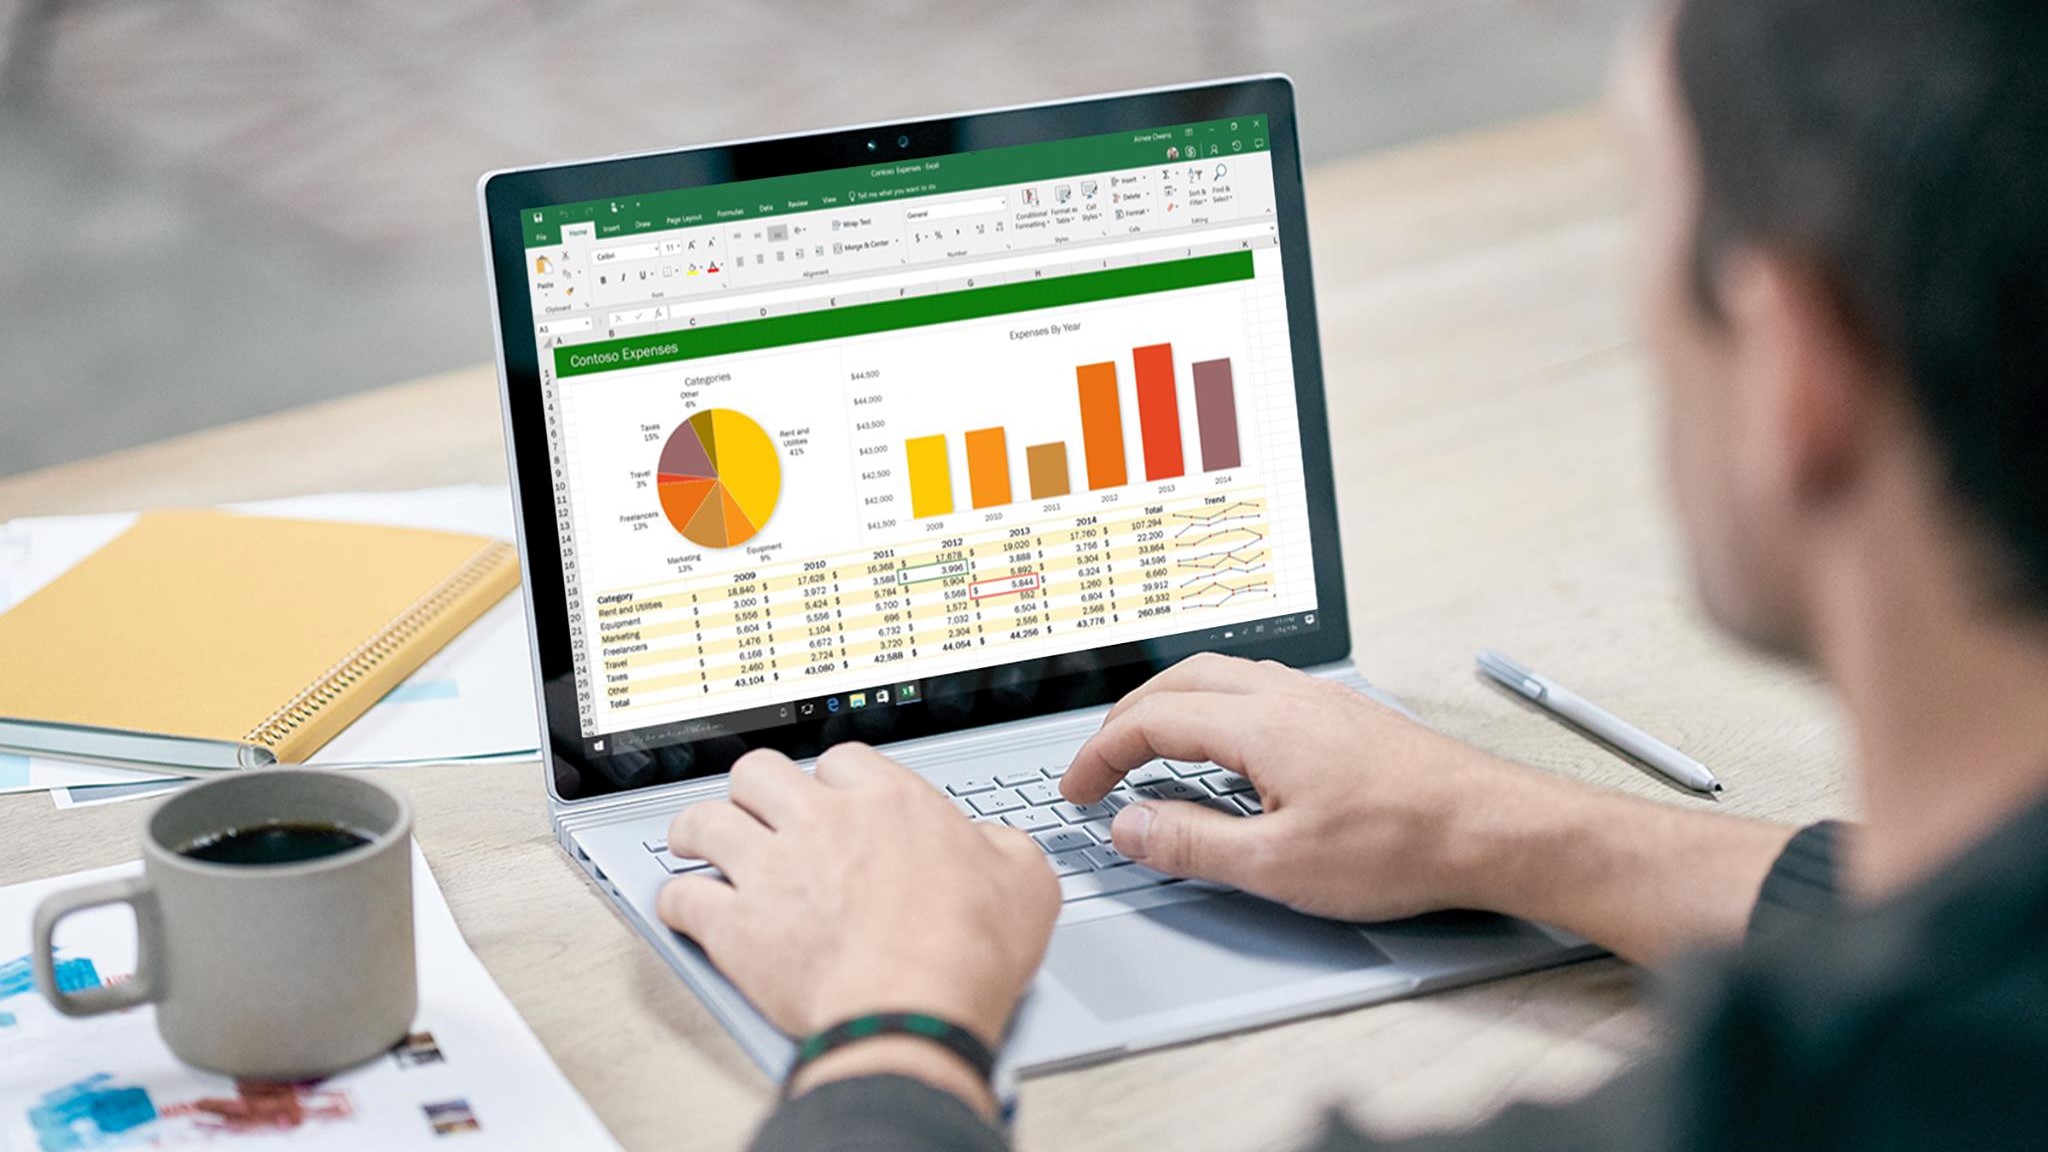 Microsoft Excel has unveiled an absolutely mind-blowing new feature